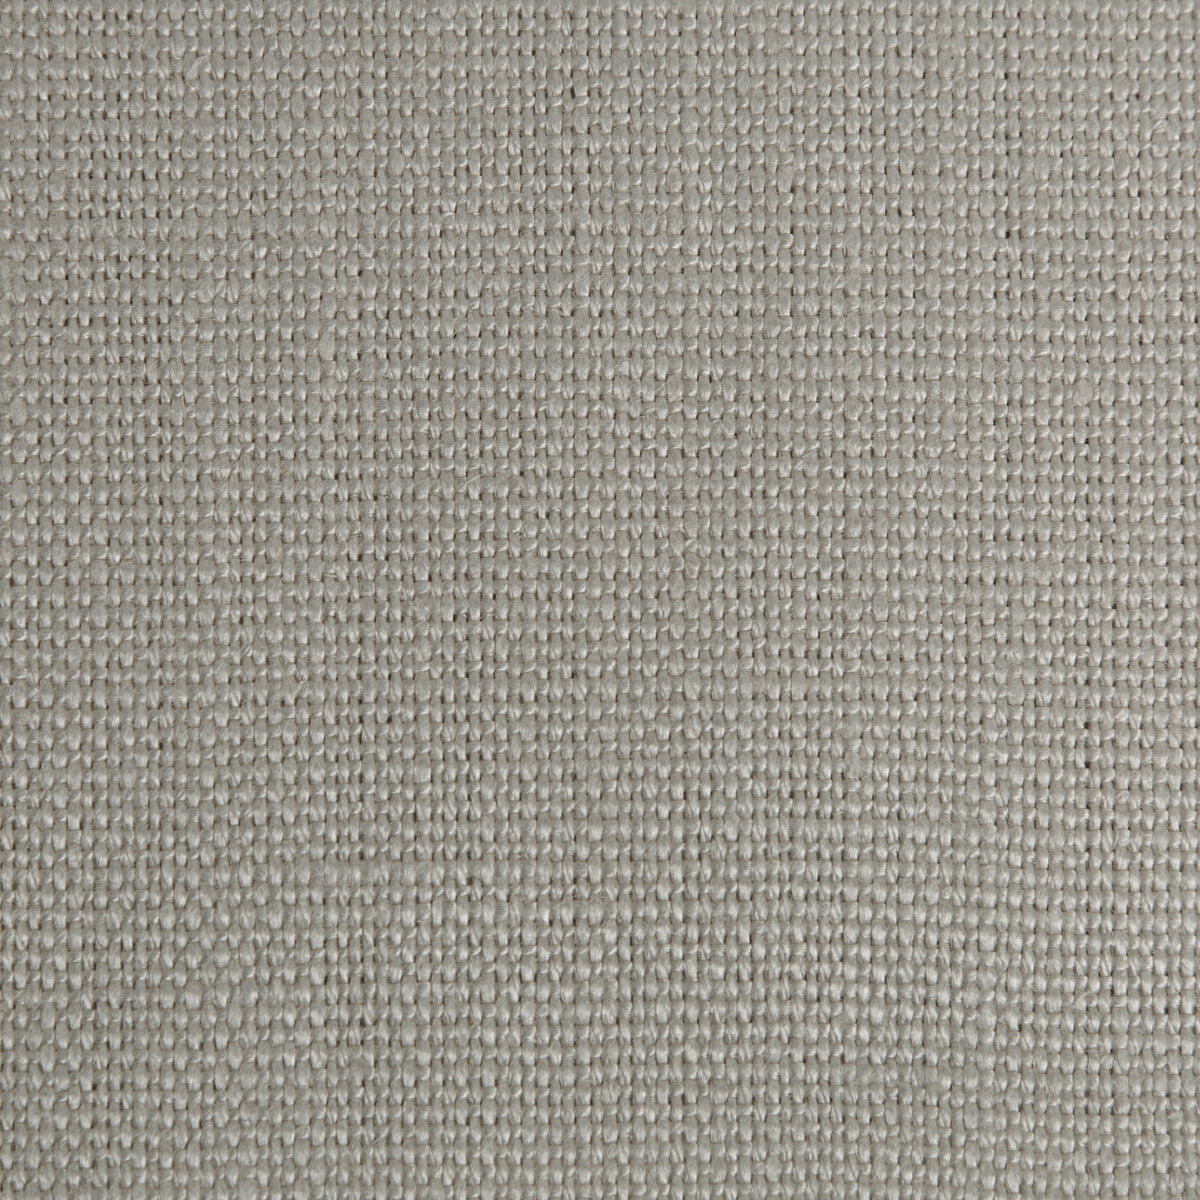 Hampton Linen fabric in sterling color - pattern 2012171.2111.0 - by Lee Jofa in the Colour Complements II collection